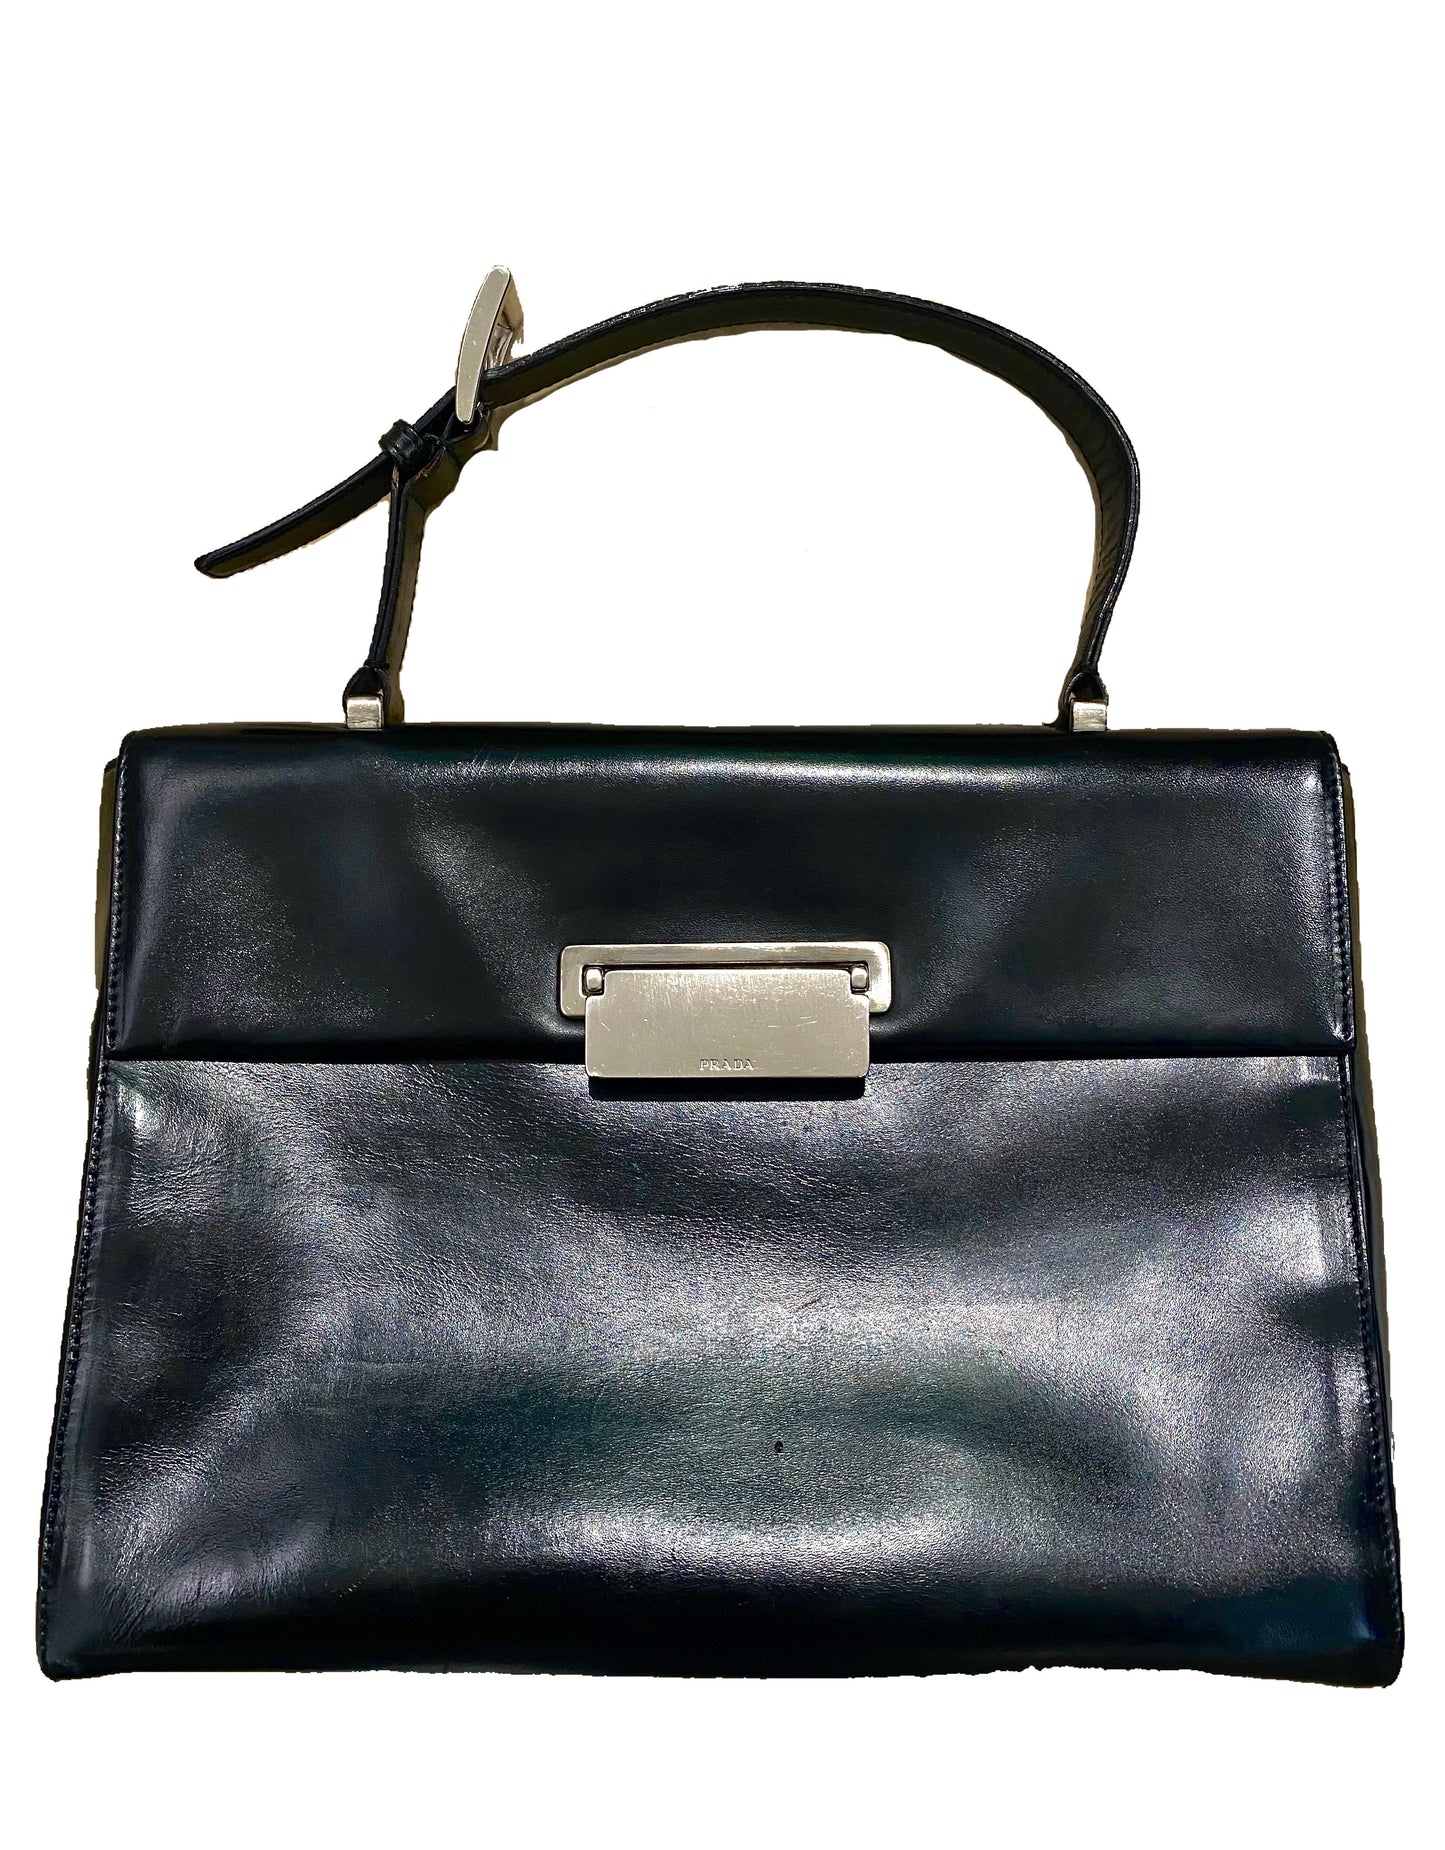 Prada black leather handbag with dustbag and certificates, mint